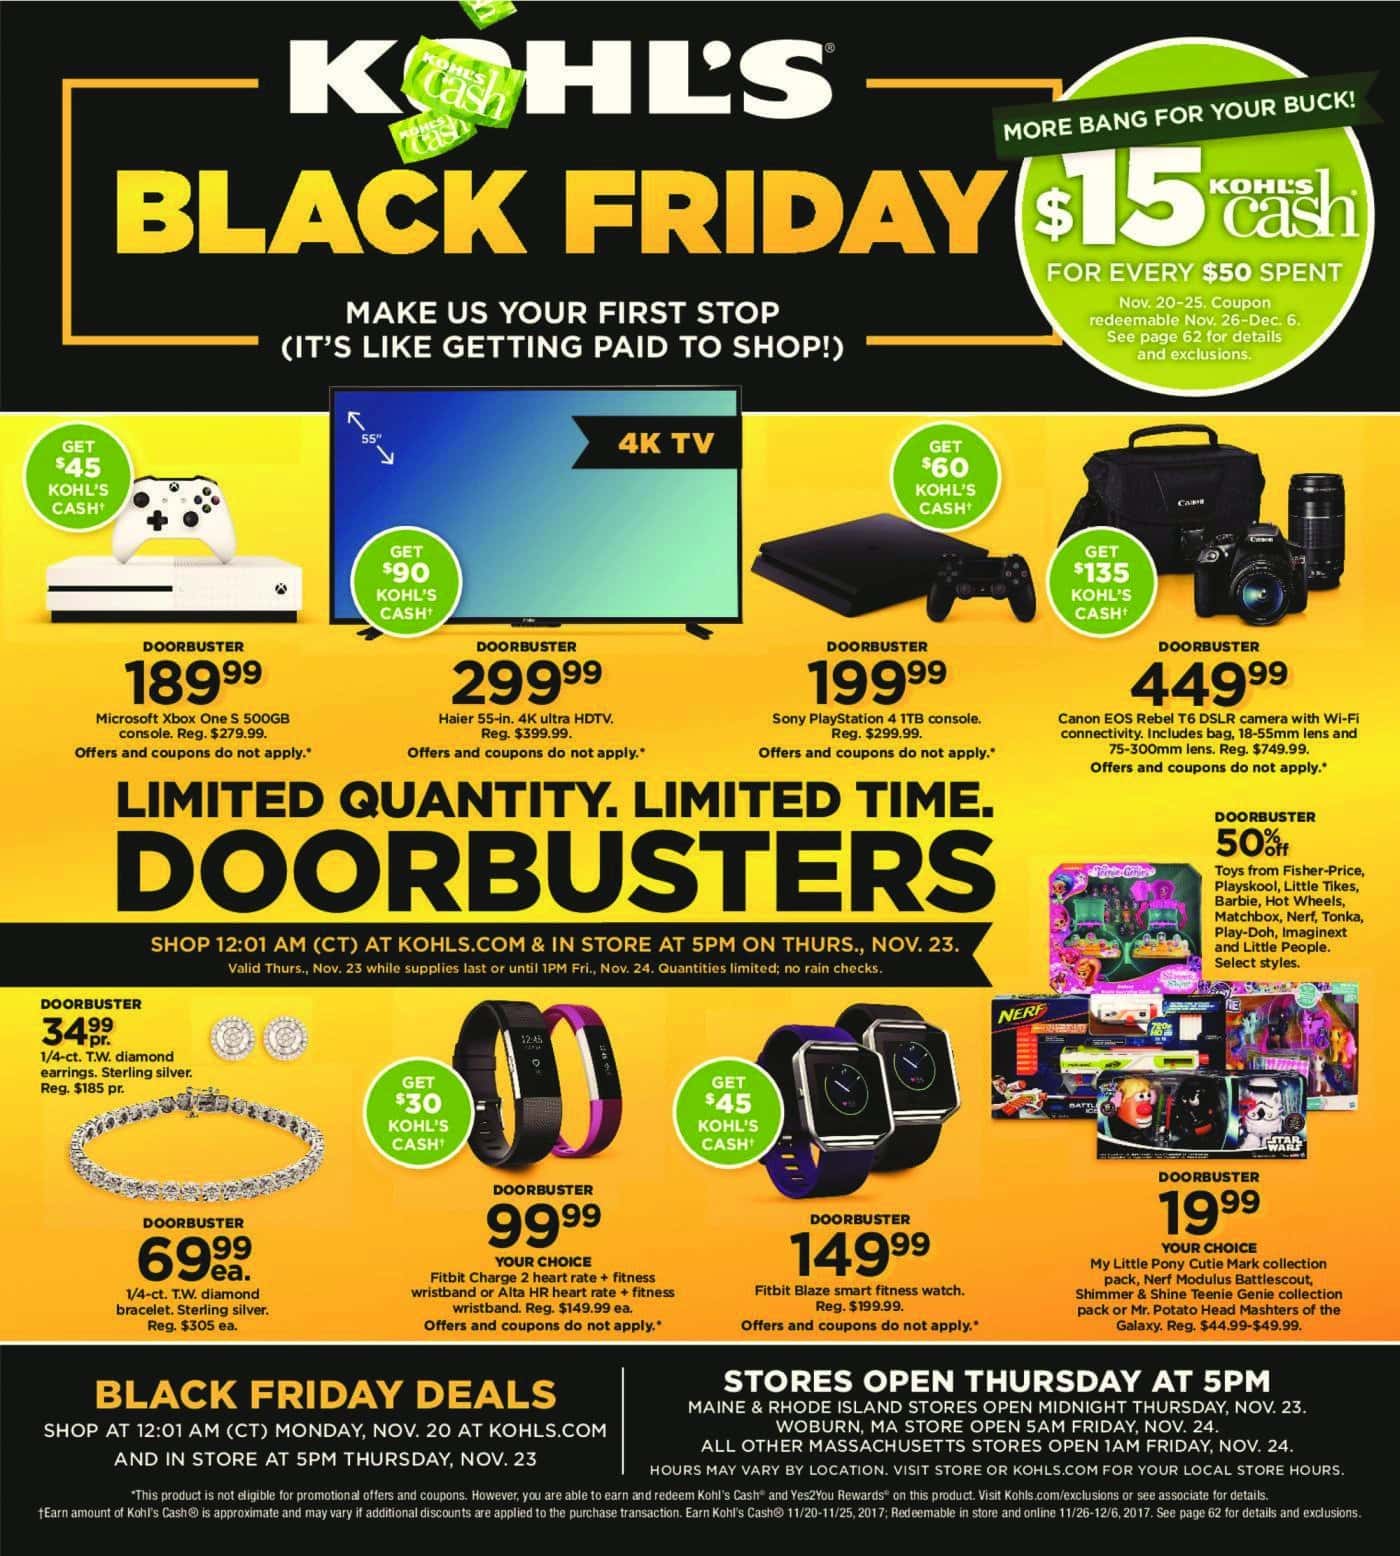 Kohl's Black Friday Deals for 2015 - What Are The Black Friday Deals 2015